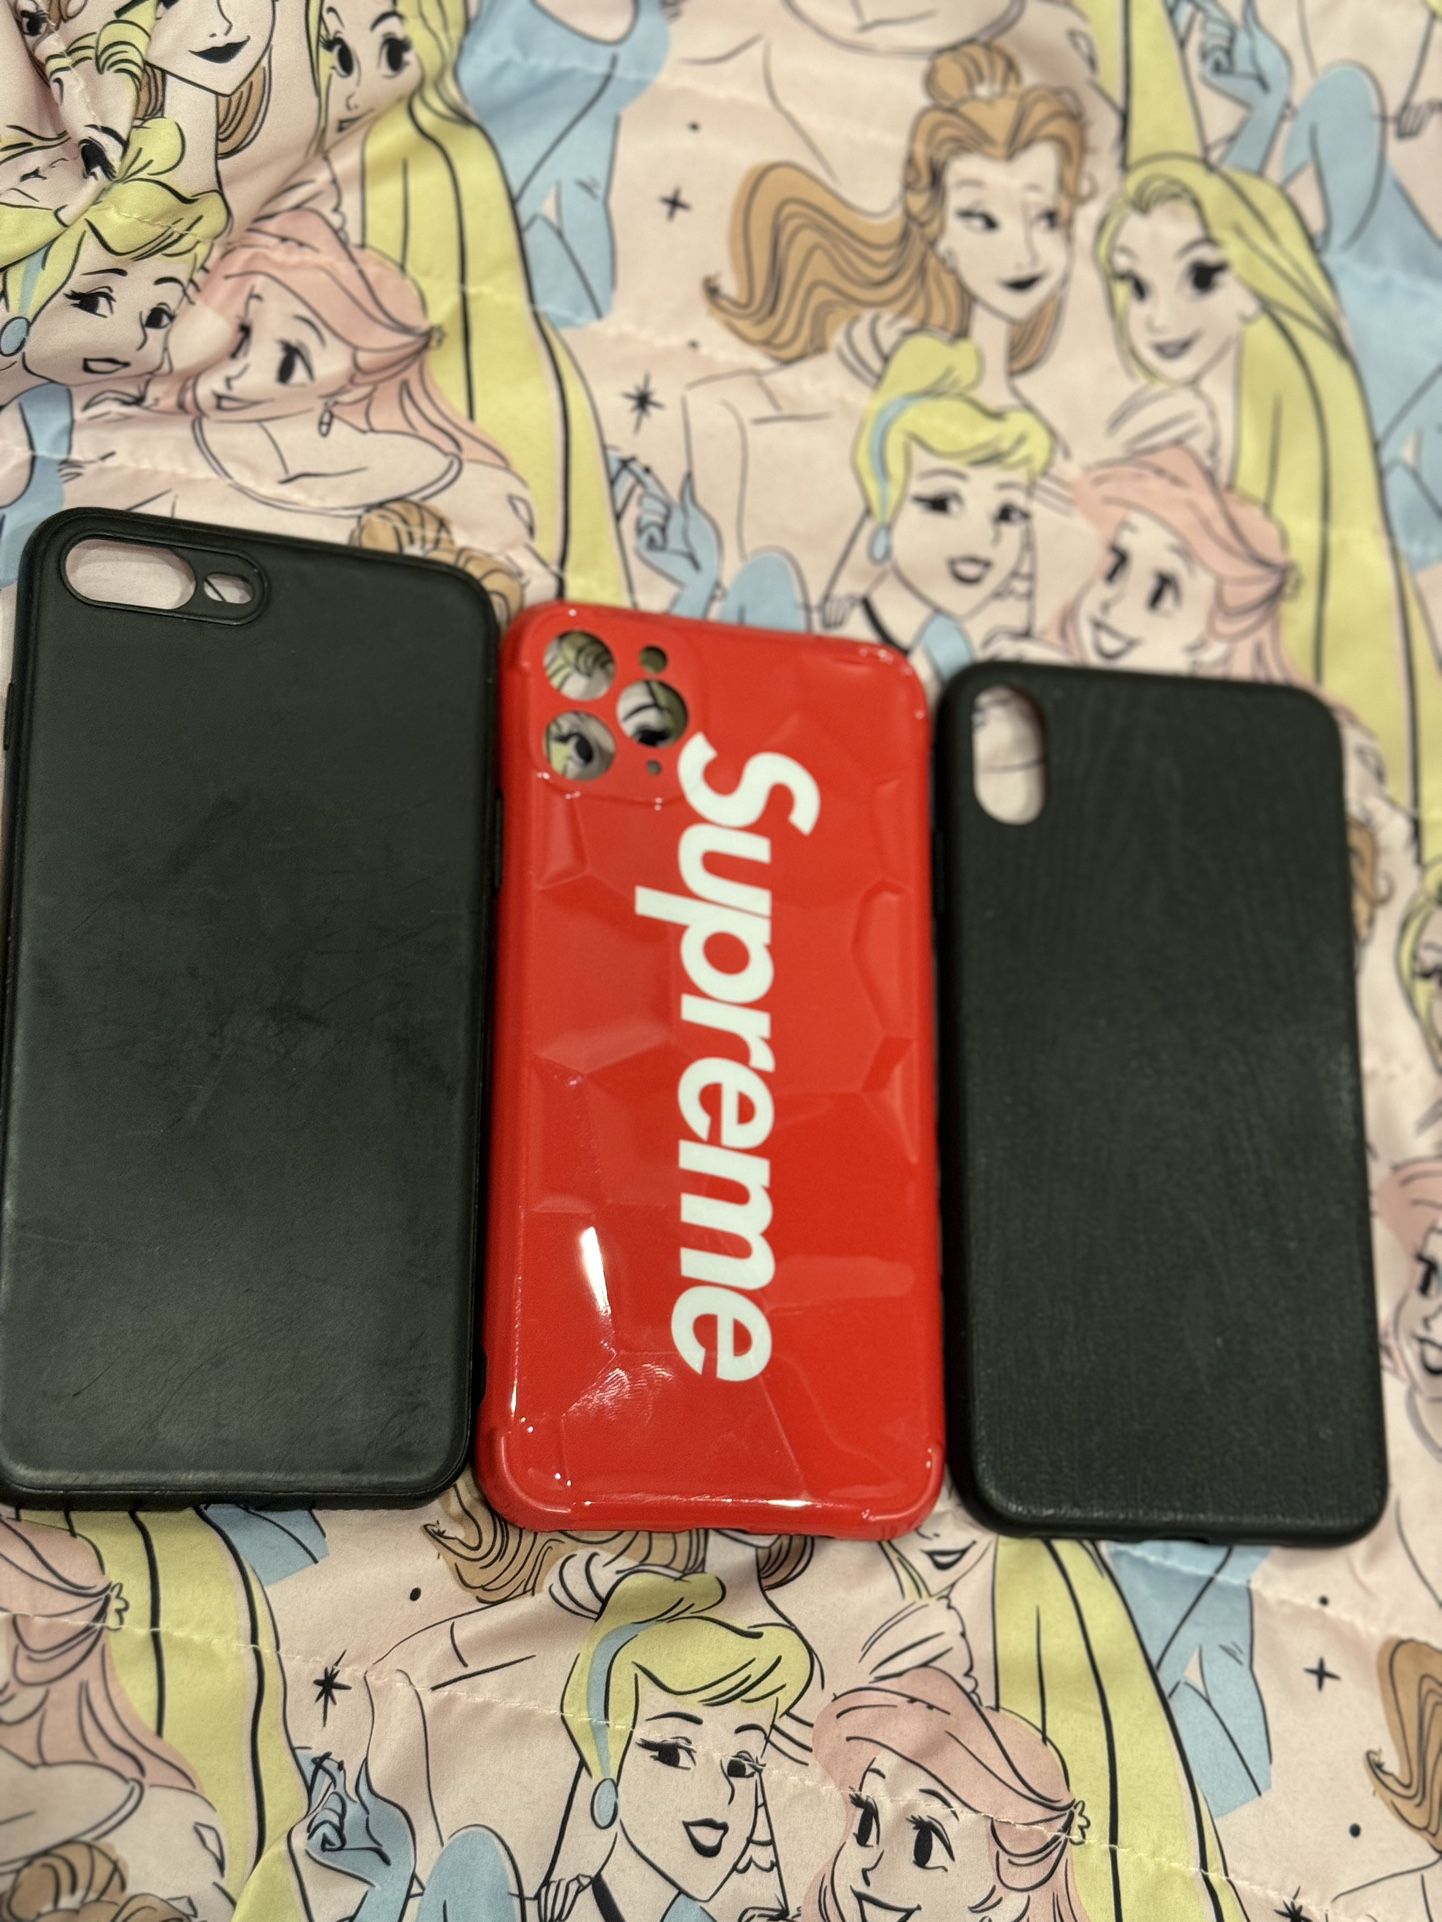 iPhone Phone Cases Each For 5 Dollar 